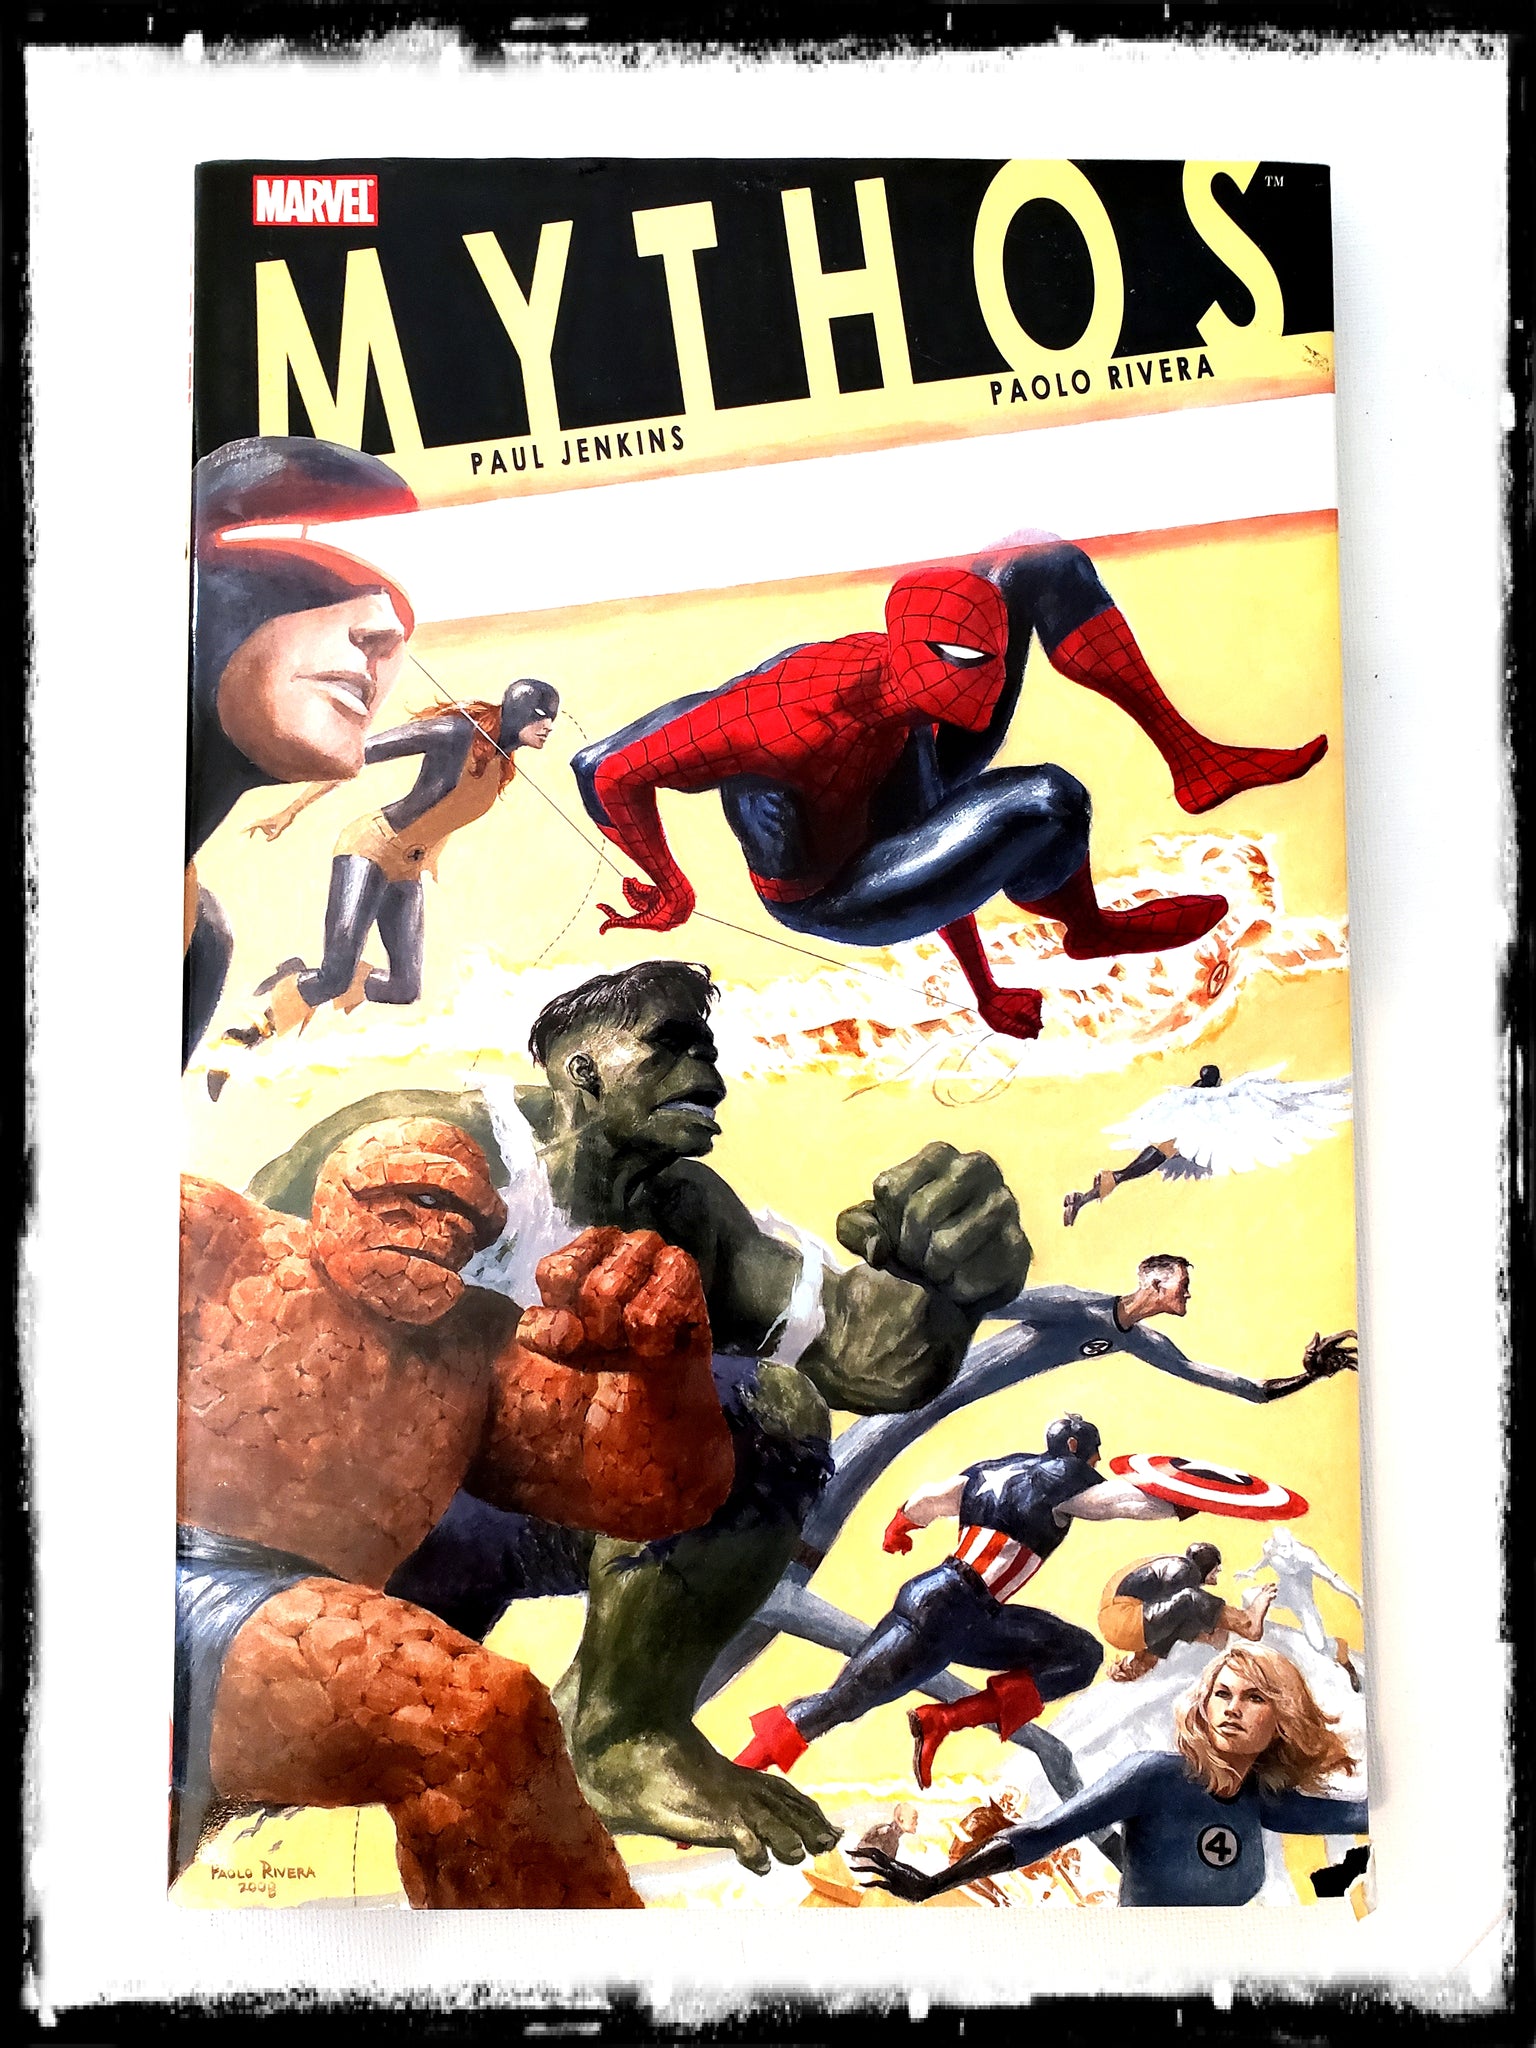 MYTHOS - 2008 HARDCOVER (OUT OF PRINT)